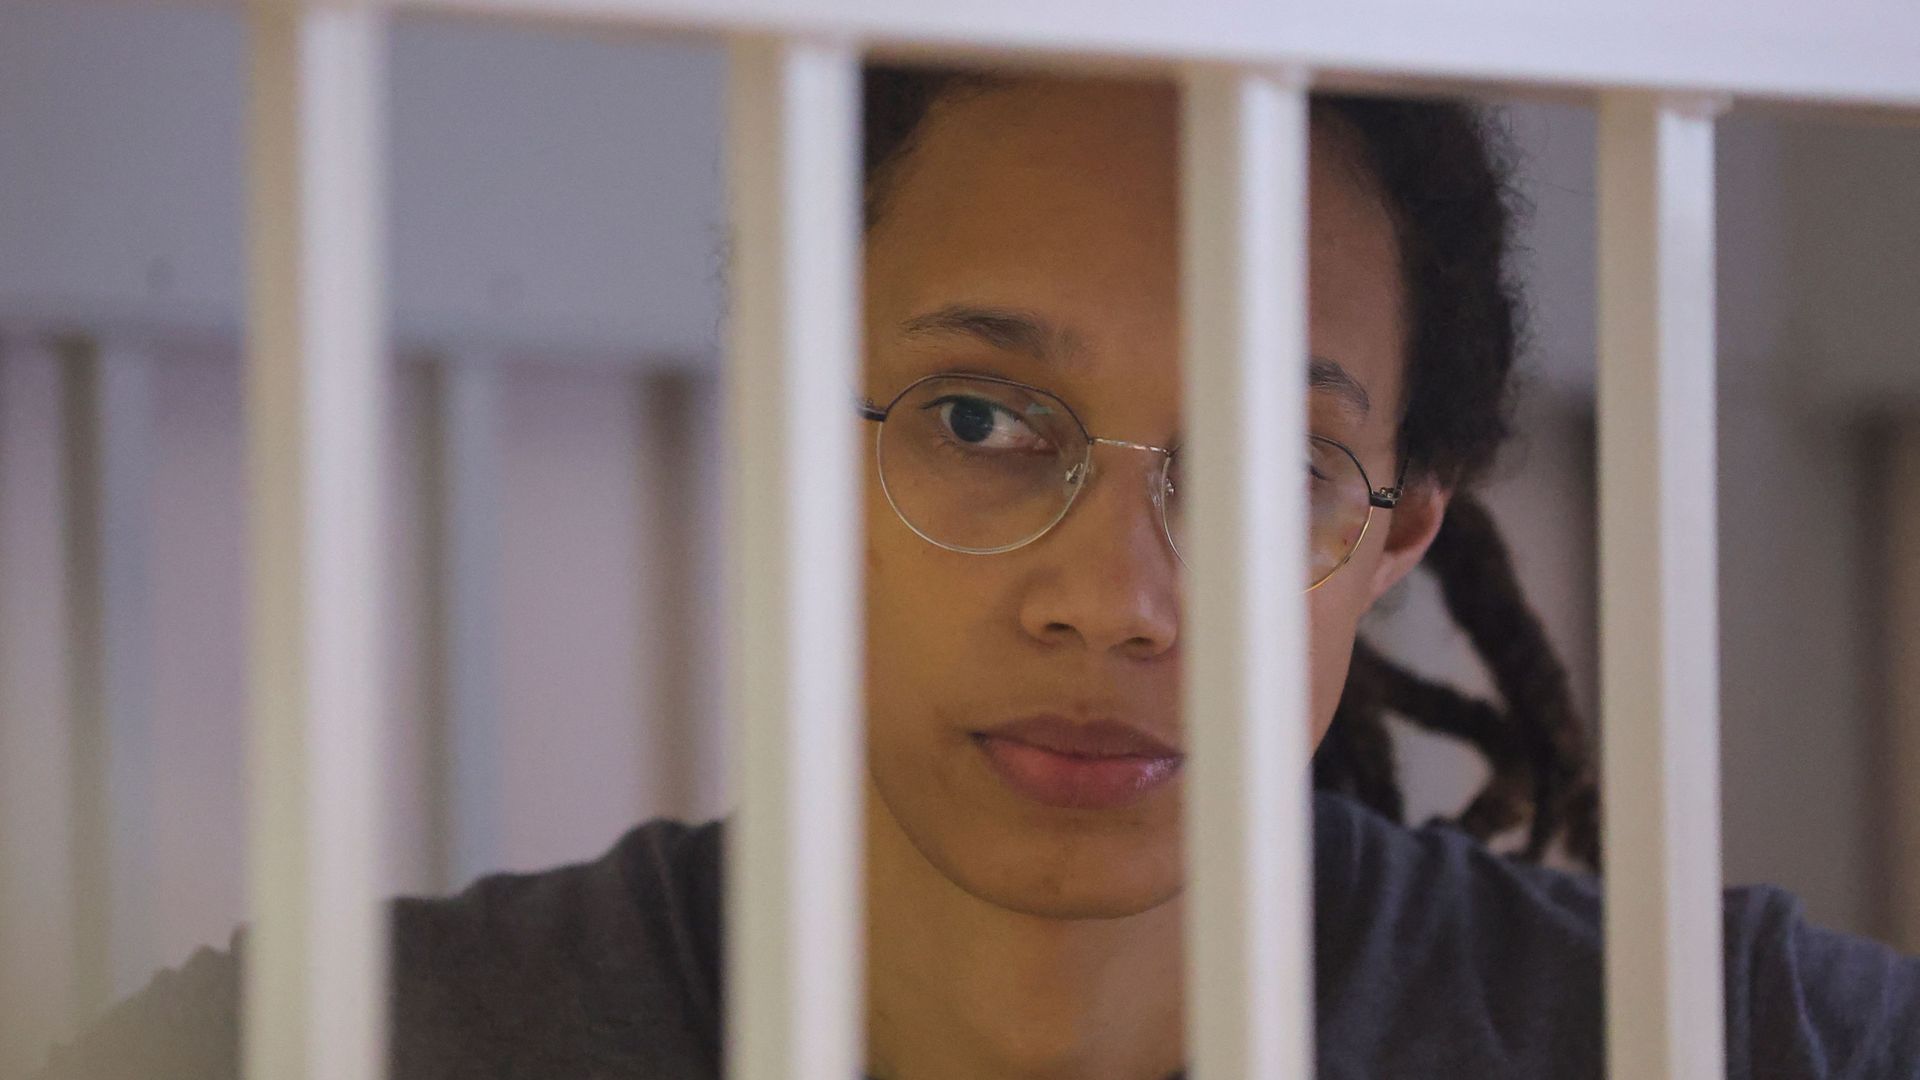 Brittney Griner waits for the verdict inside a defendants' cage during a hearing in Khimki outside Moscow, on August 4, 2022